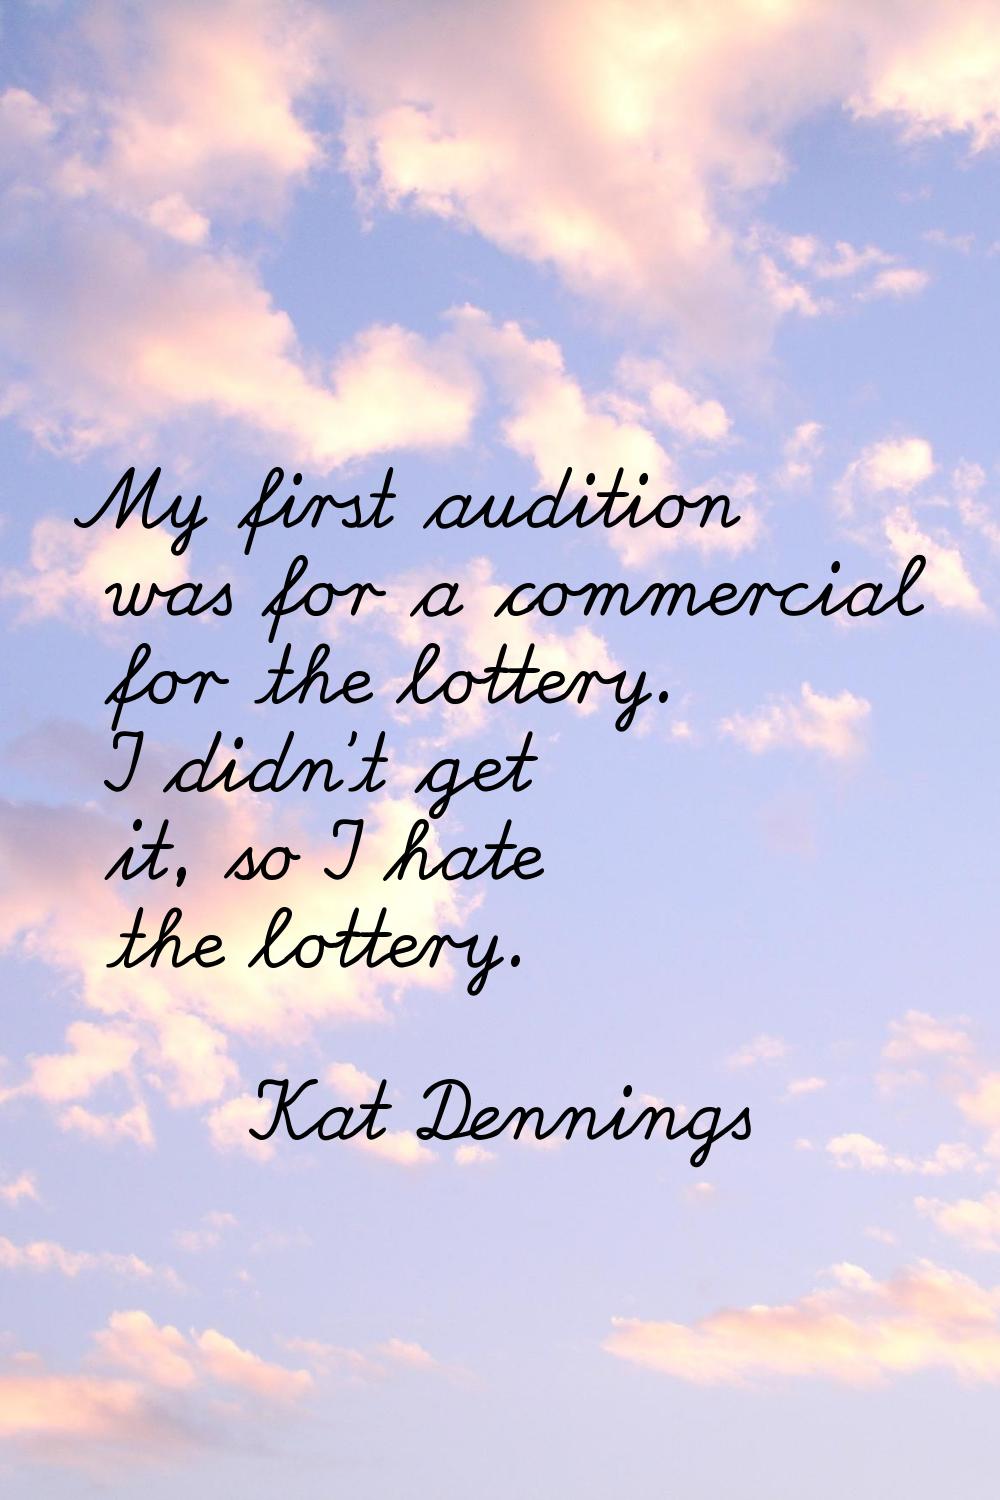 My first audition was for a commercial for the lottery. I didn't get it, so I hate the lottery.